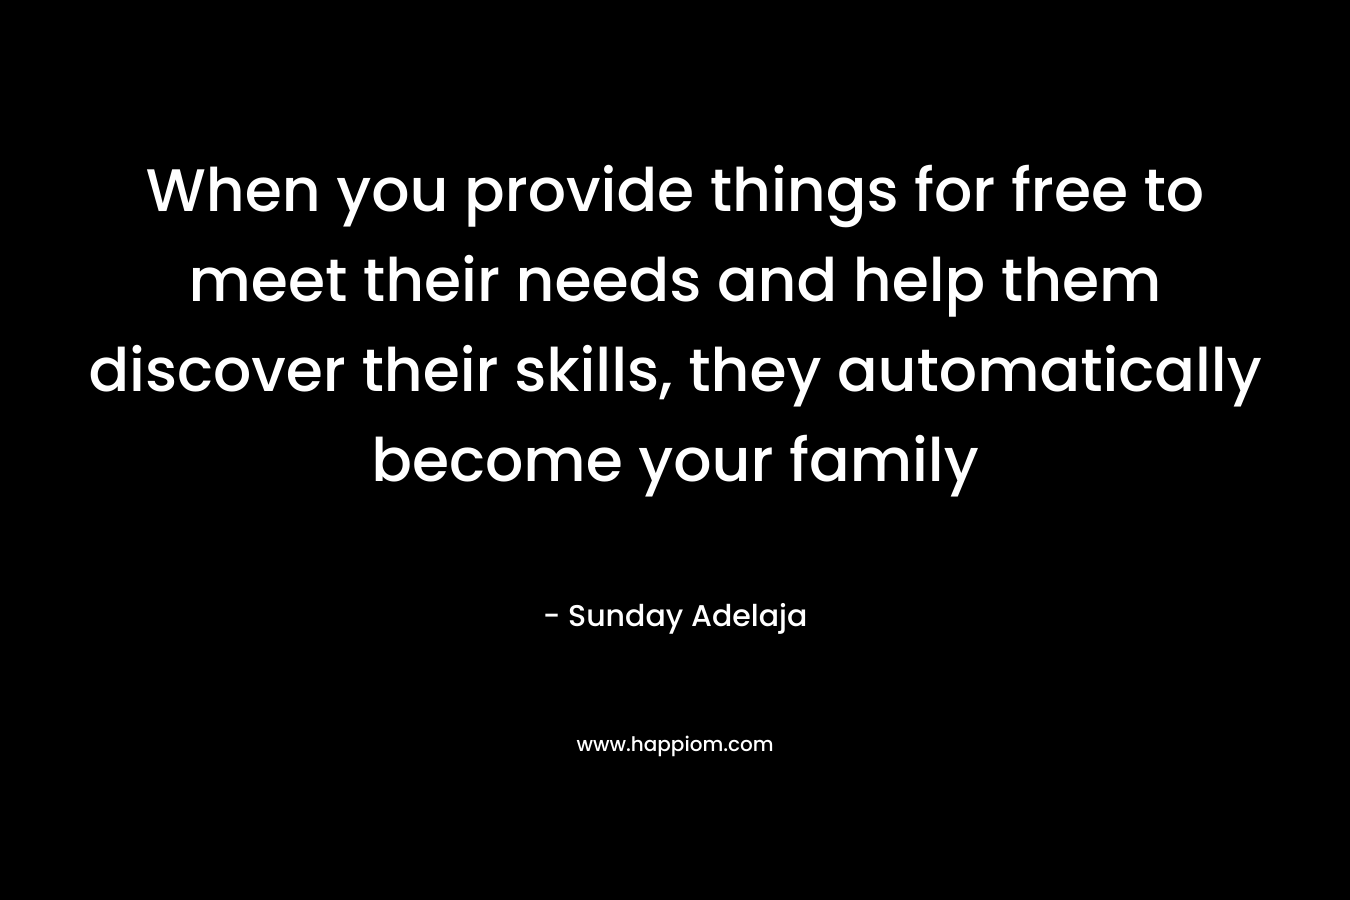 When you provide things for free to meet their needs and help them discover their skills, they automatically become your family